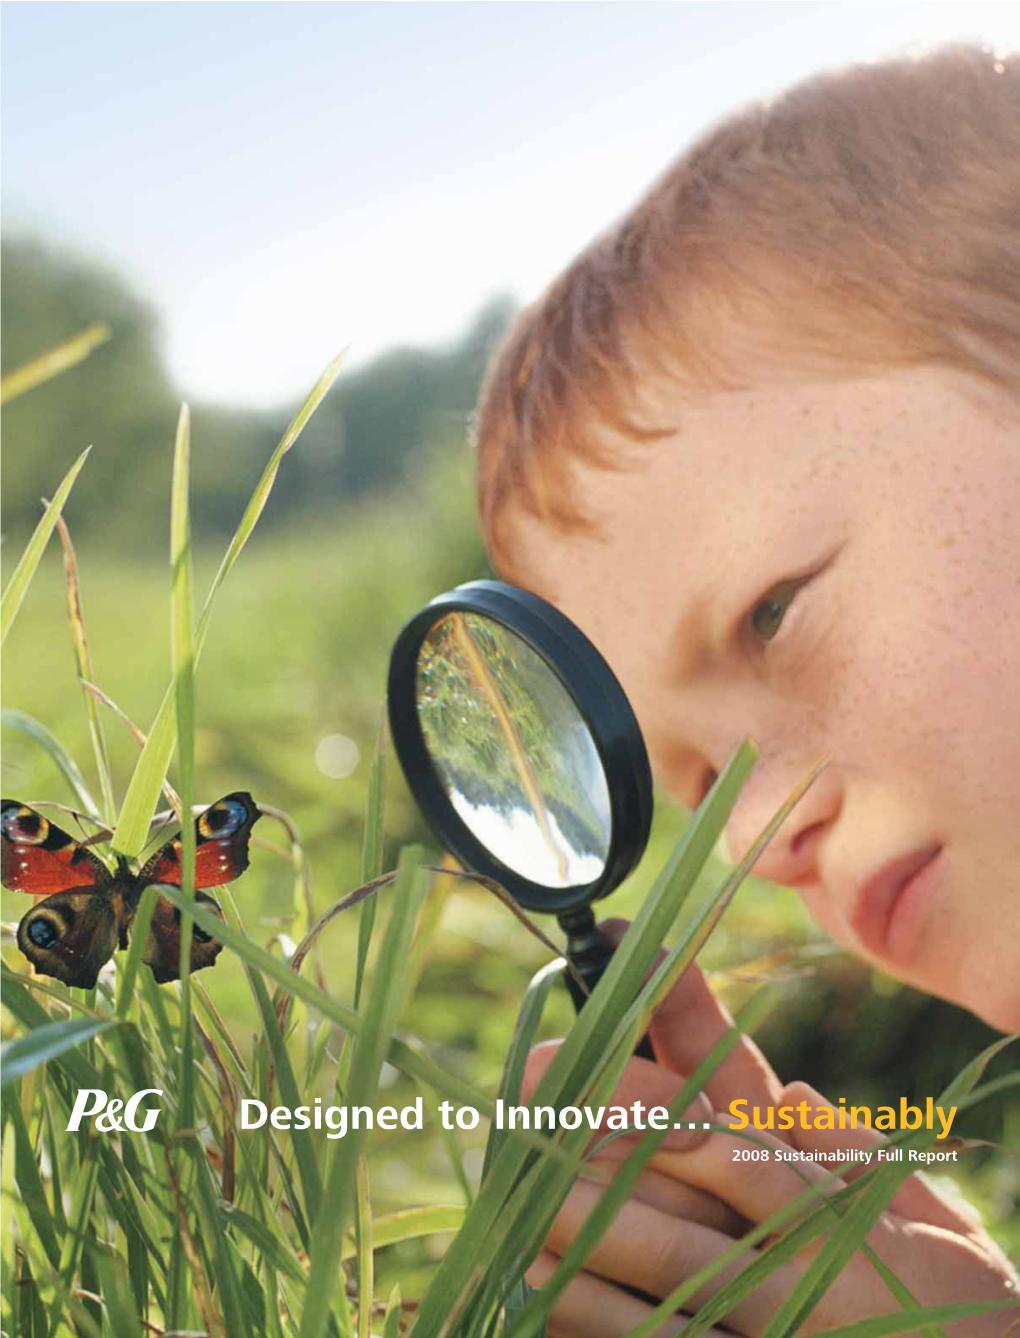 Designed to Innovate... Sustainably